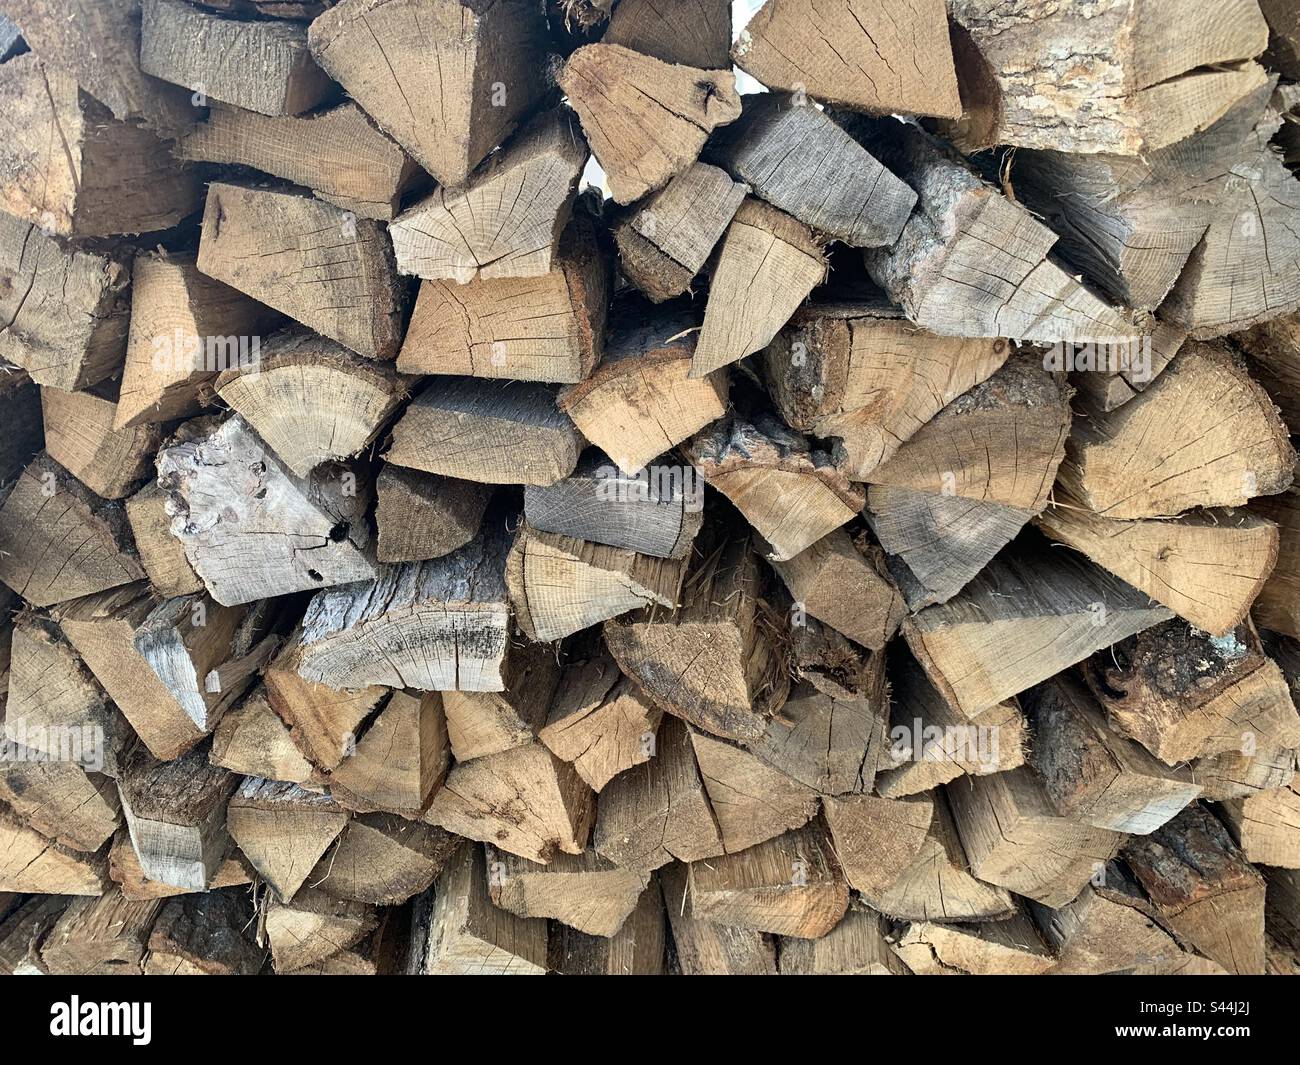 A rack of firewood made of split logs. Stock Photo